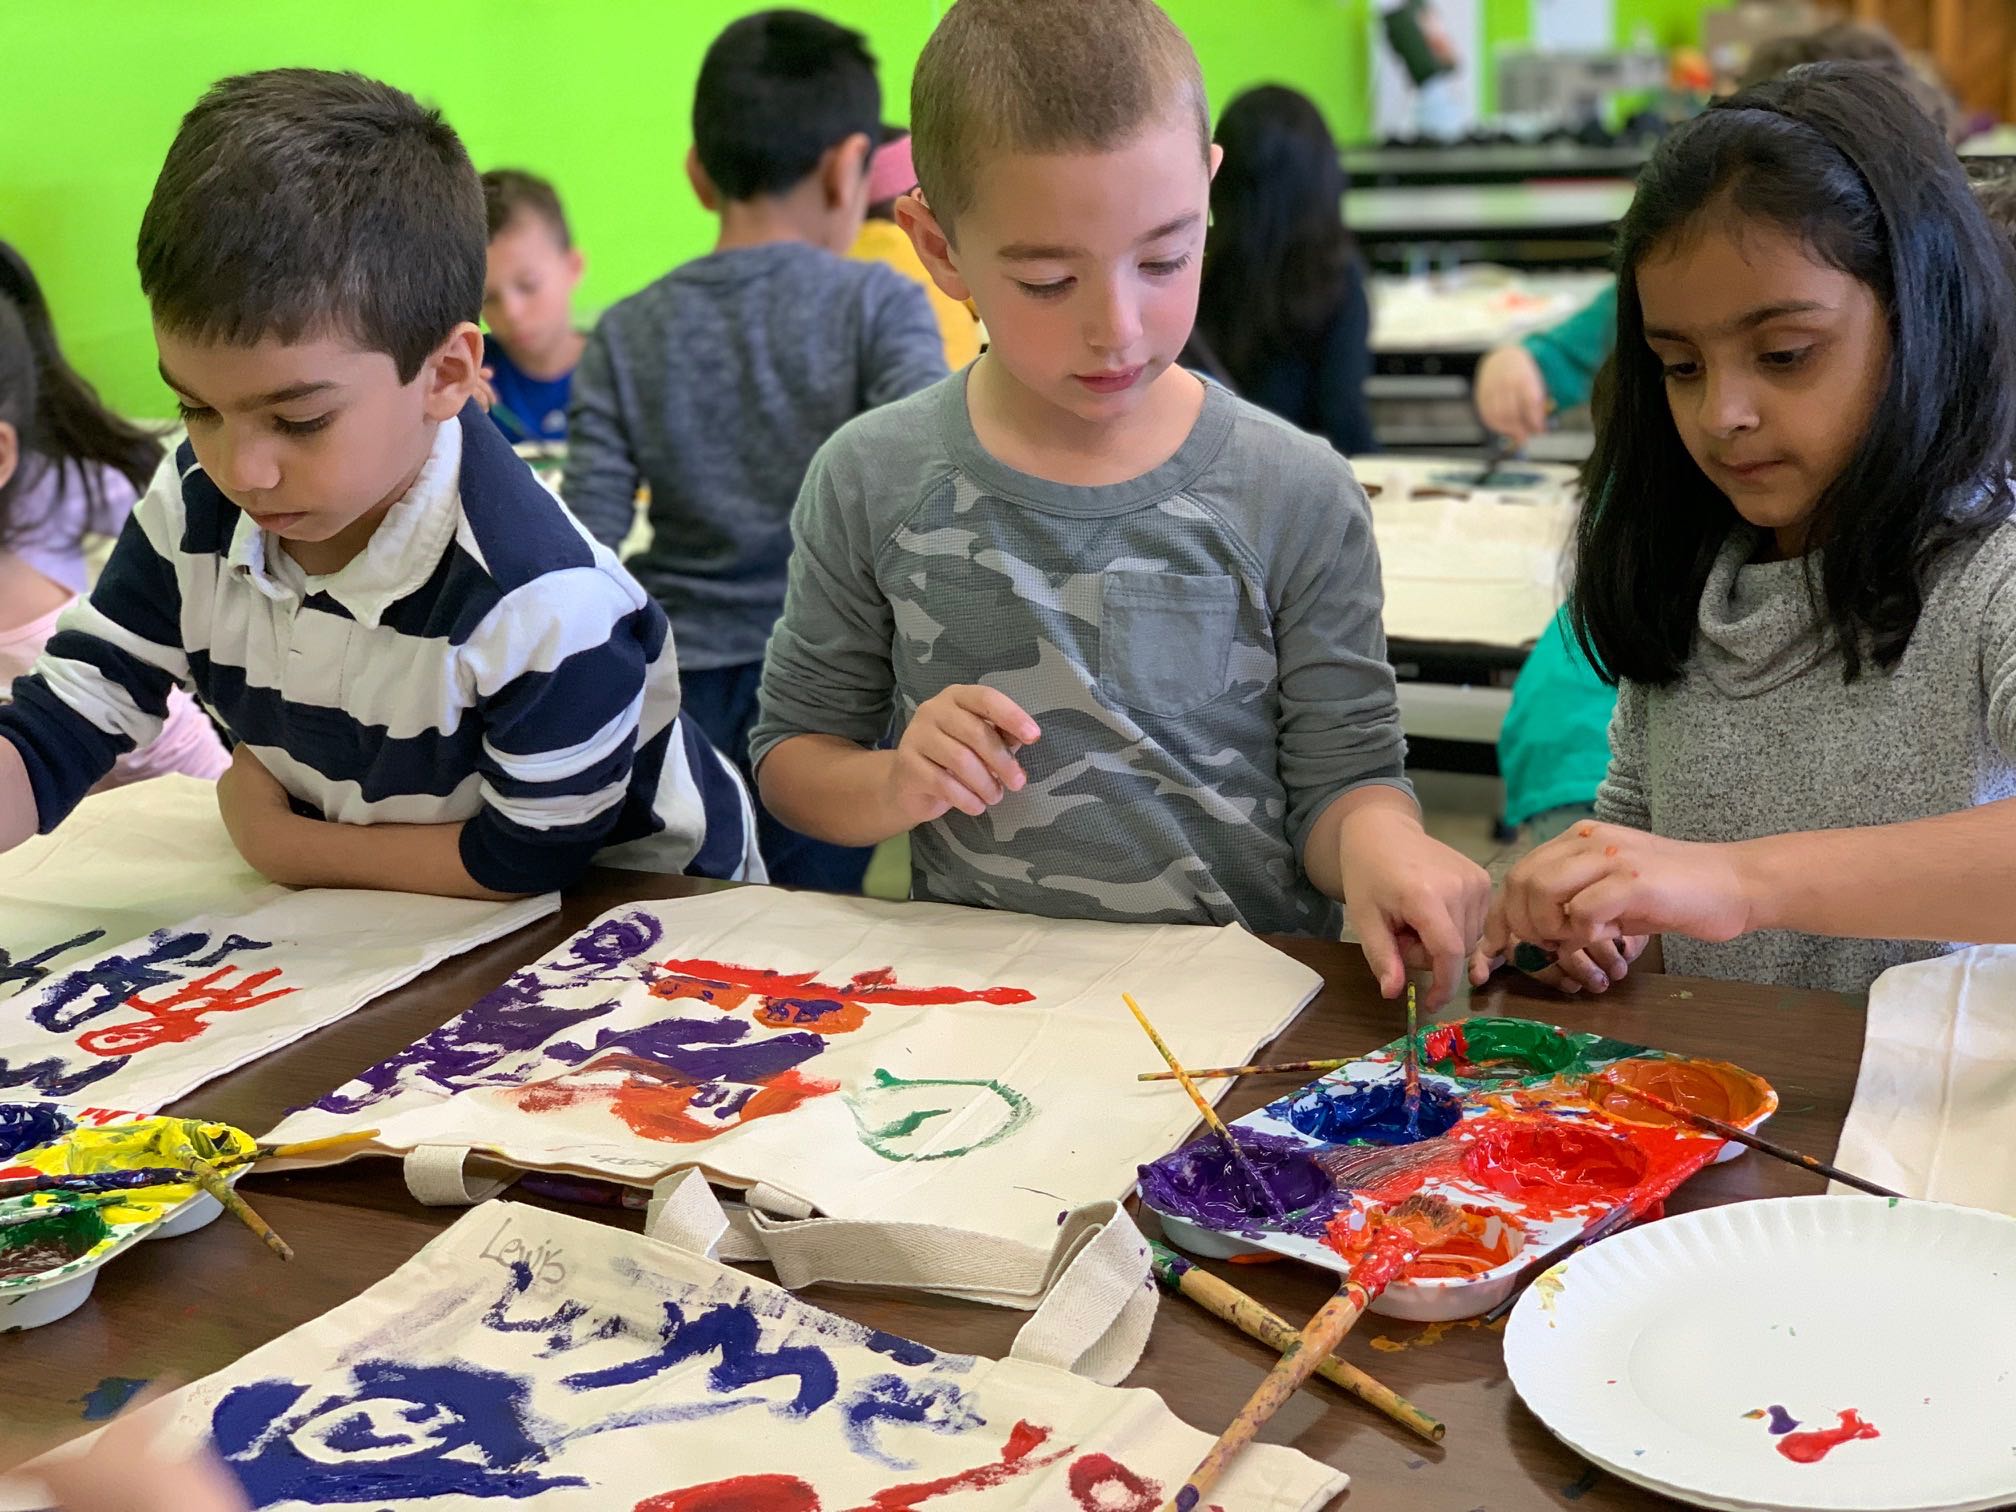 Hampton Street School students participated in Earth Day-related activities on April 29. (Photos courtesy of Mineola Union Free School District)